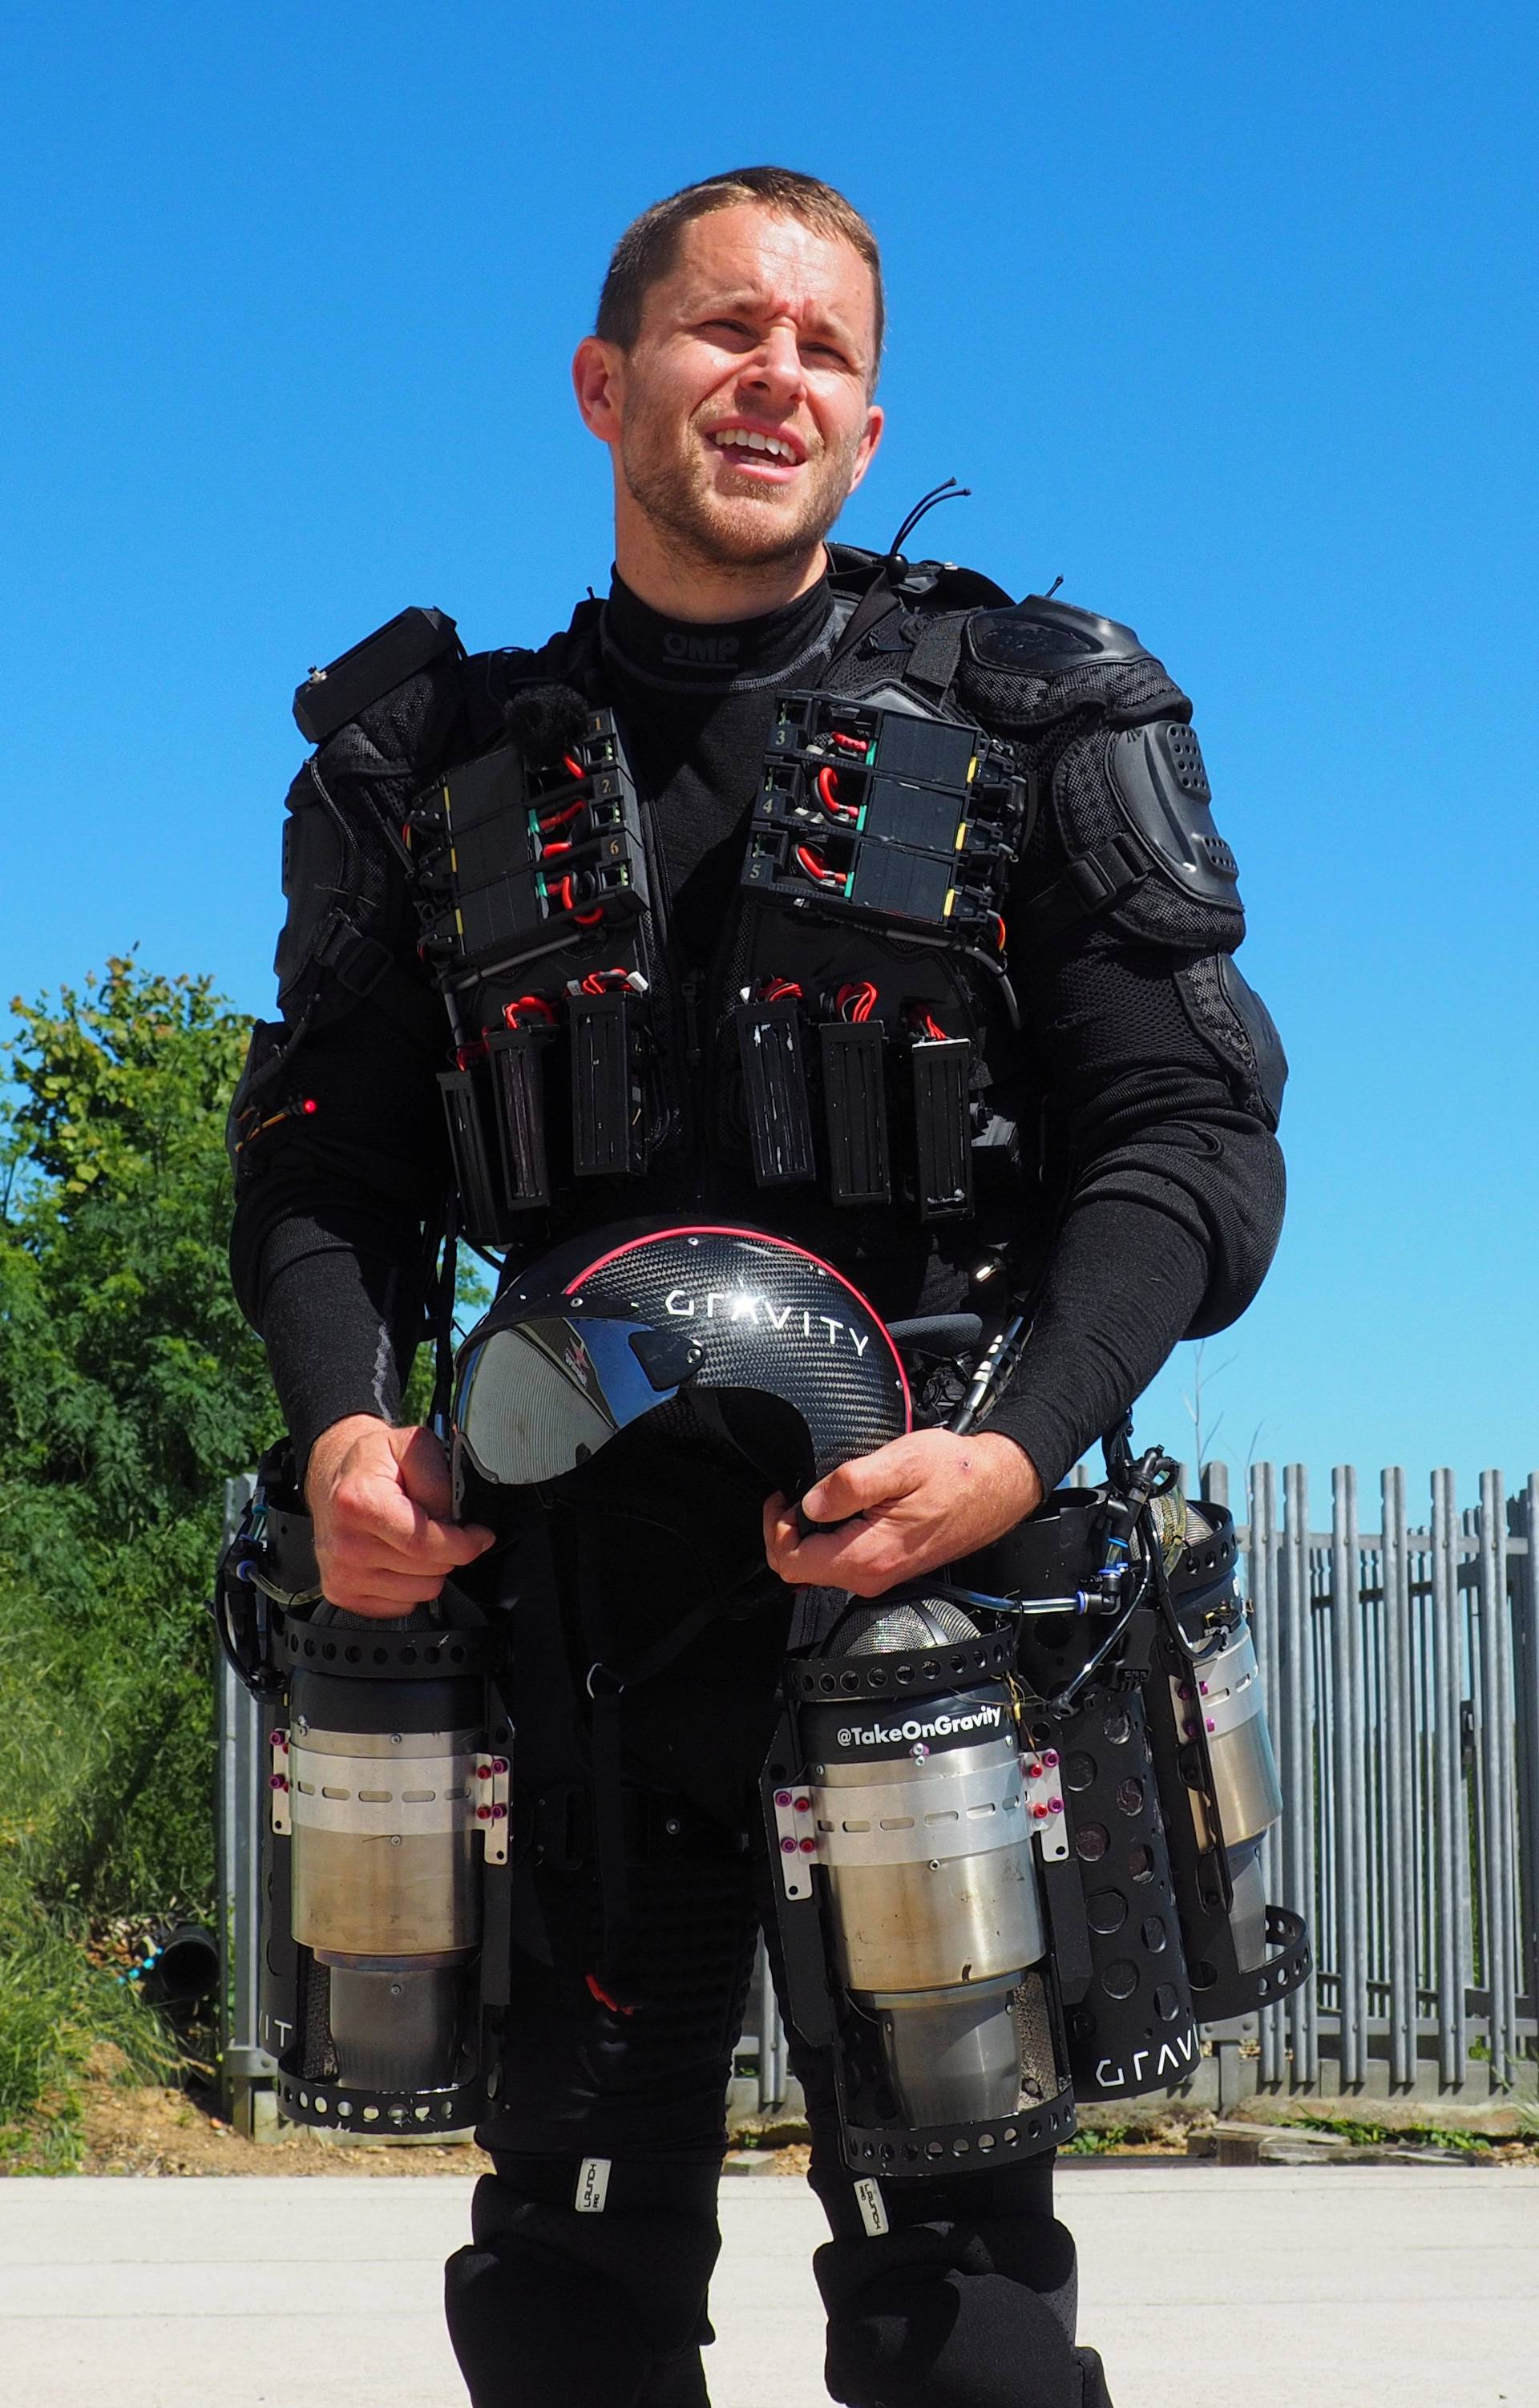 Inventor Richard Browning of technology startup Gravity wears his ÃDaedalusÃ jet suit after flight tests at Henstridge airfield in Somerset